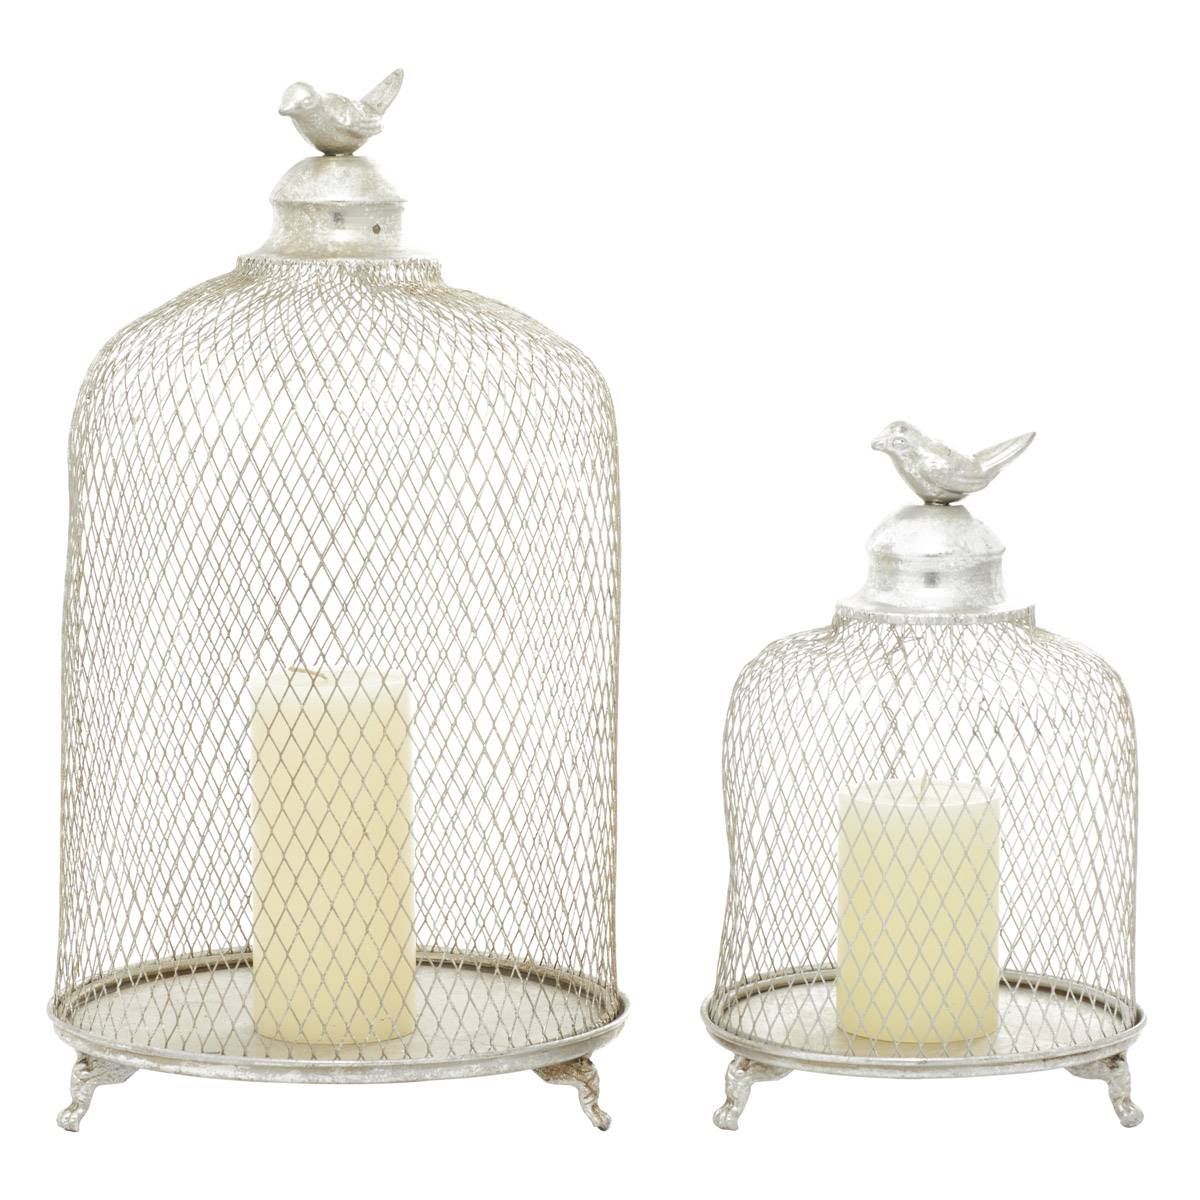 9th & Pike(R) Metal Cloche Candle Holder Lanterns - Set Of 2